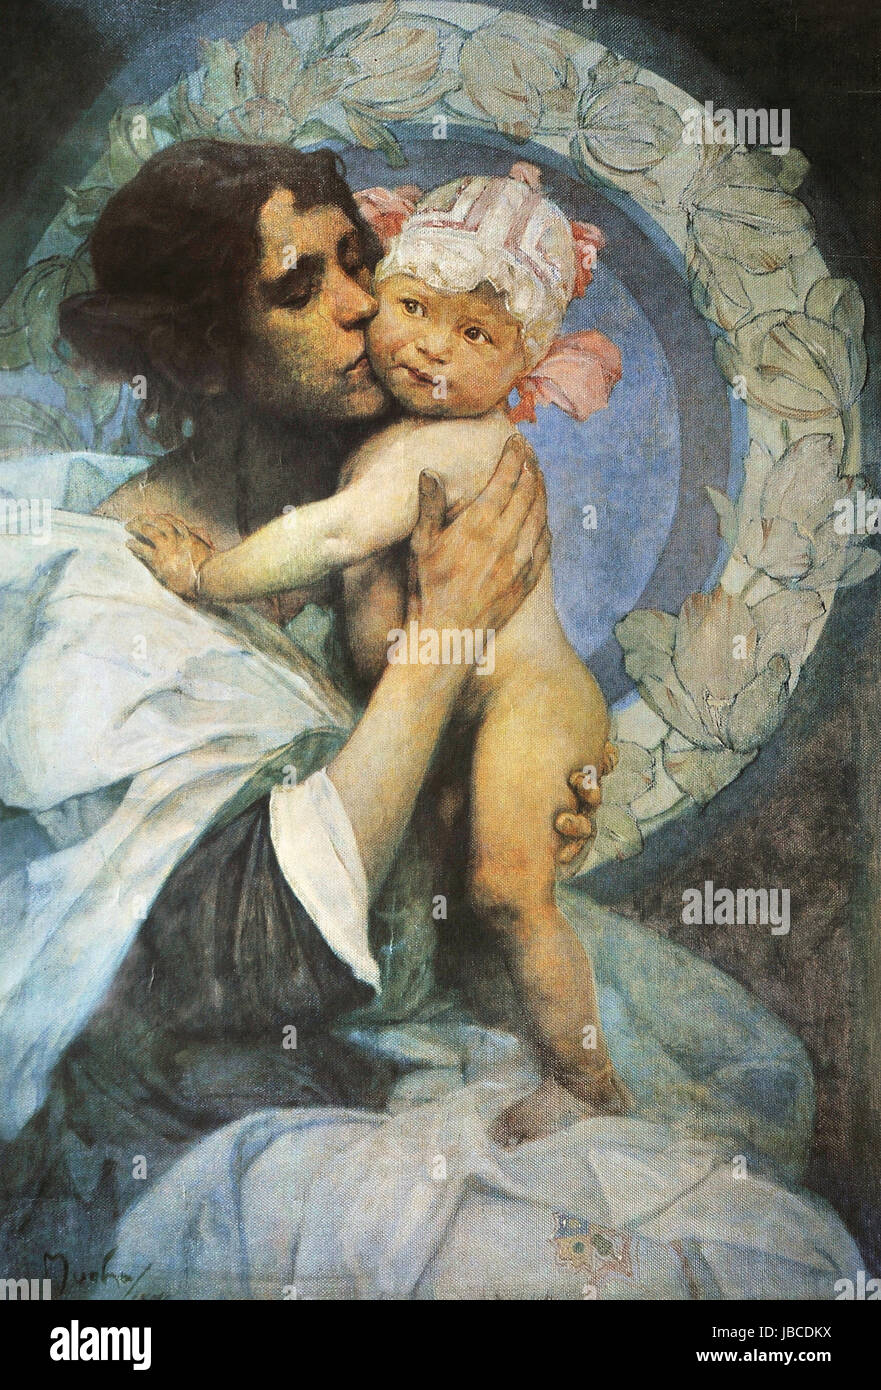 Alphonse Mucha: Mother And Child. Czechoslovak poster, published in 1980s. Stock Photo